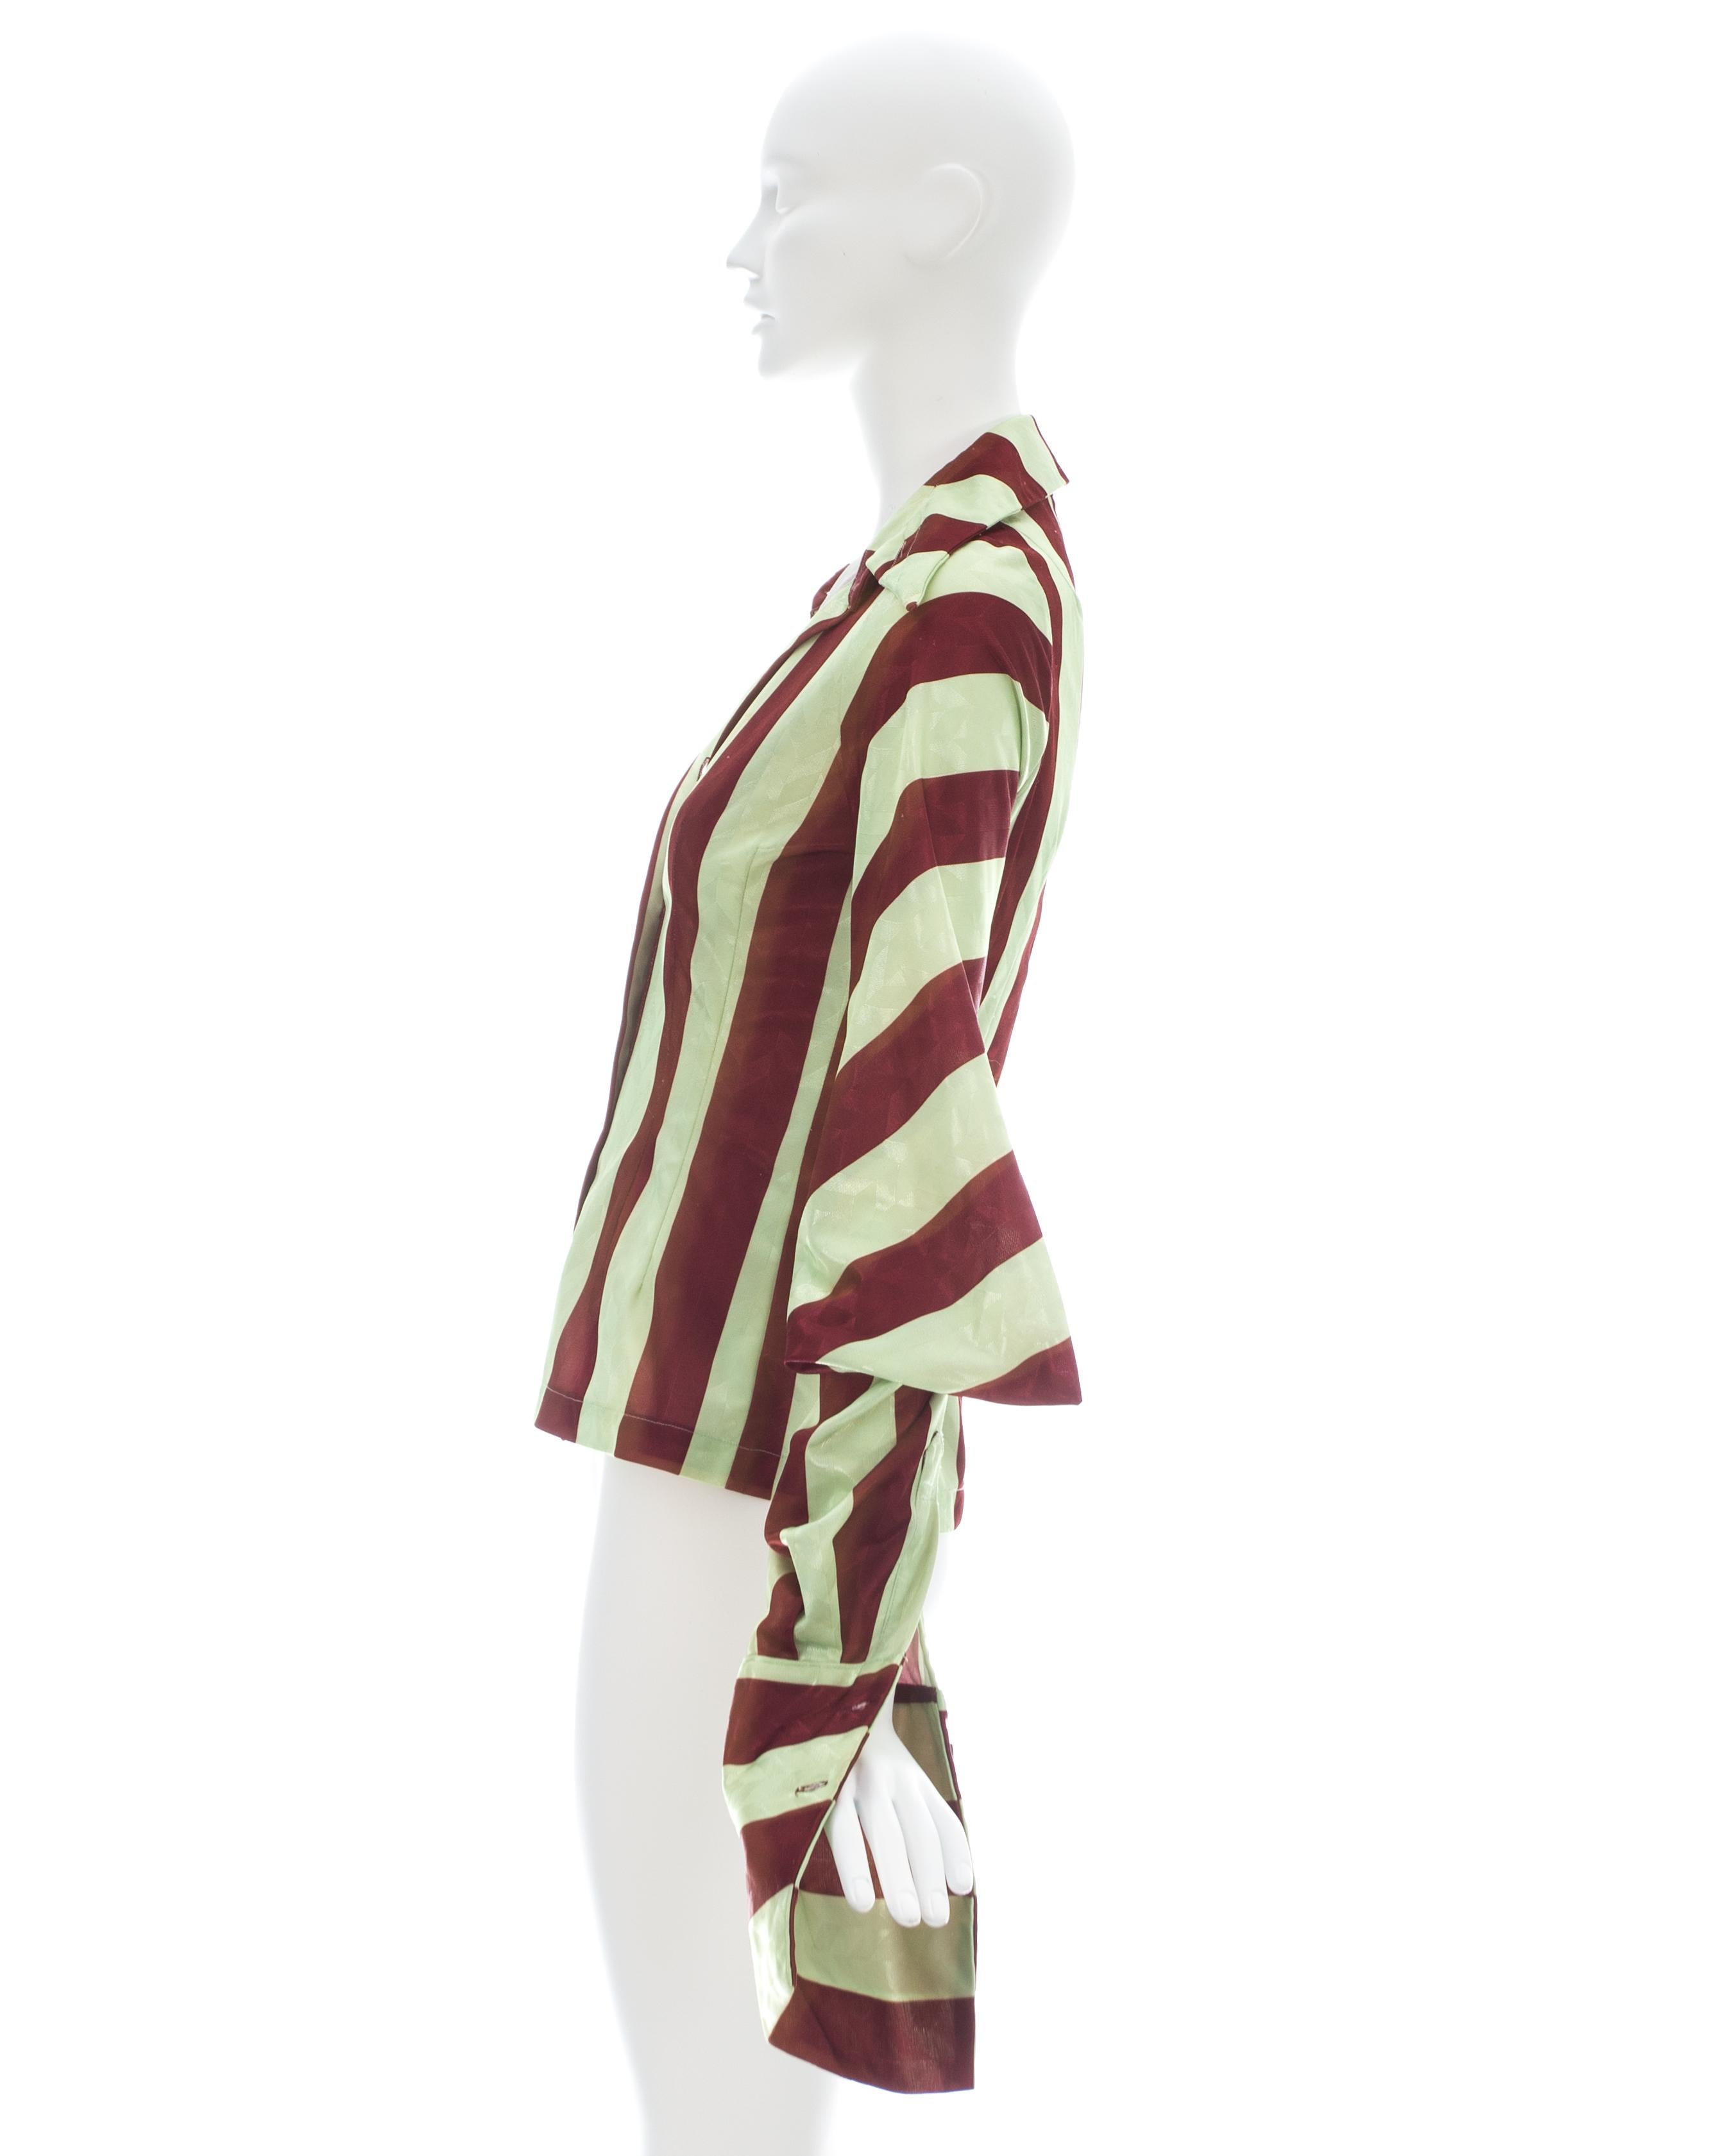 Women's John Galliano red and yellow striped polyester blouse, ca 1991